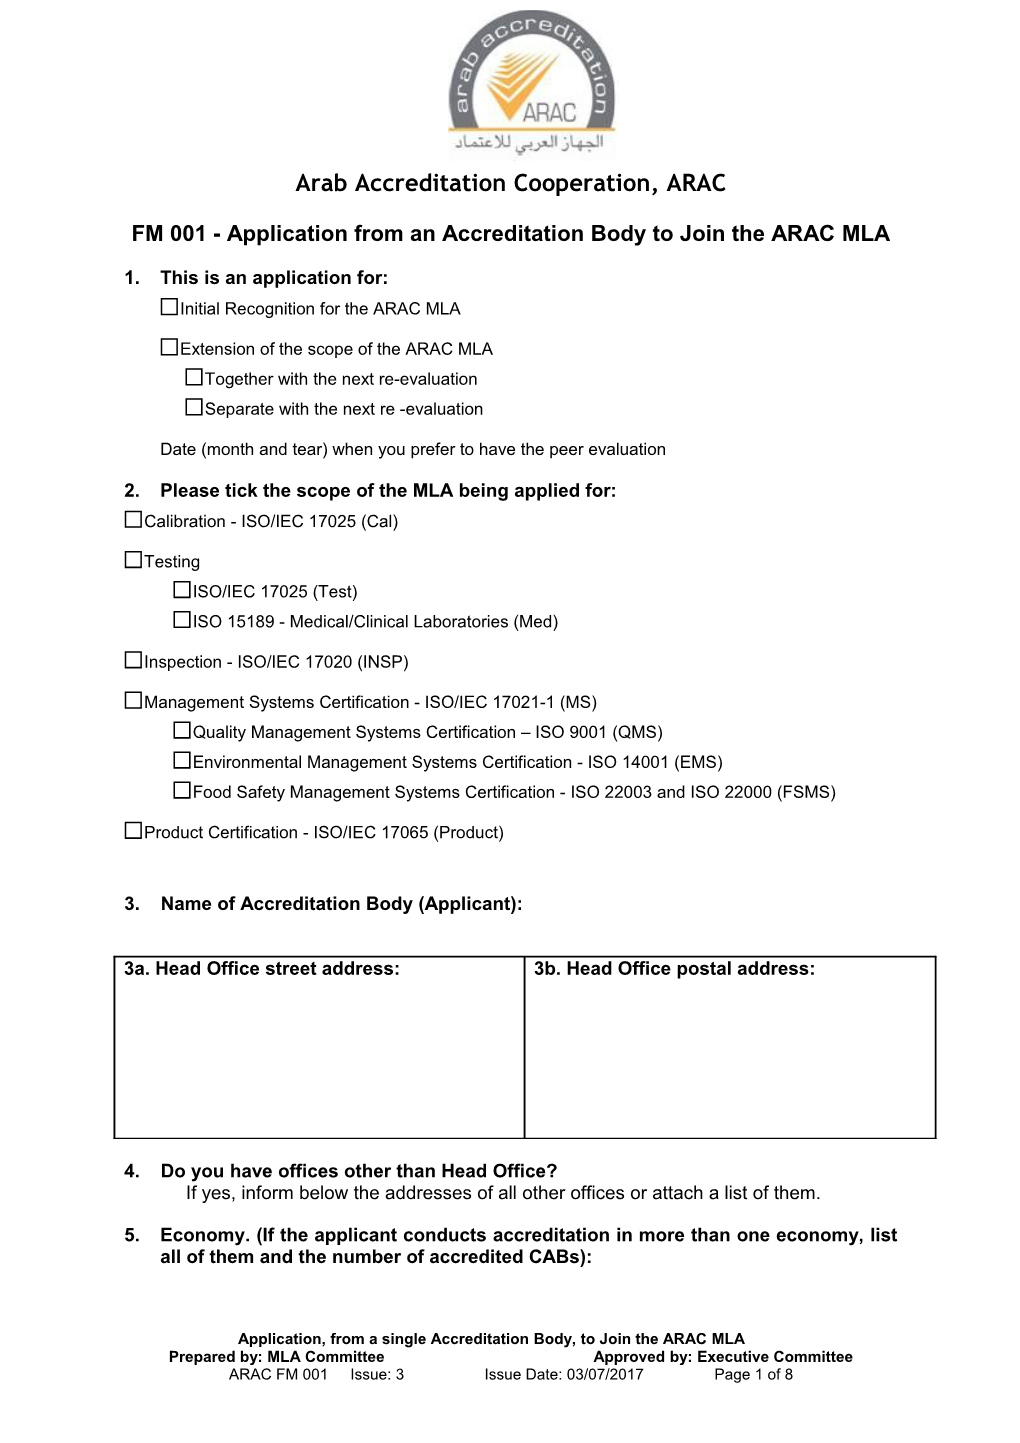 FM 001 - Application from an Accreditation Body to Join the ARAC MLA